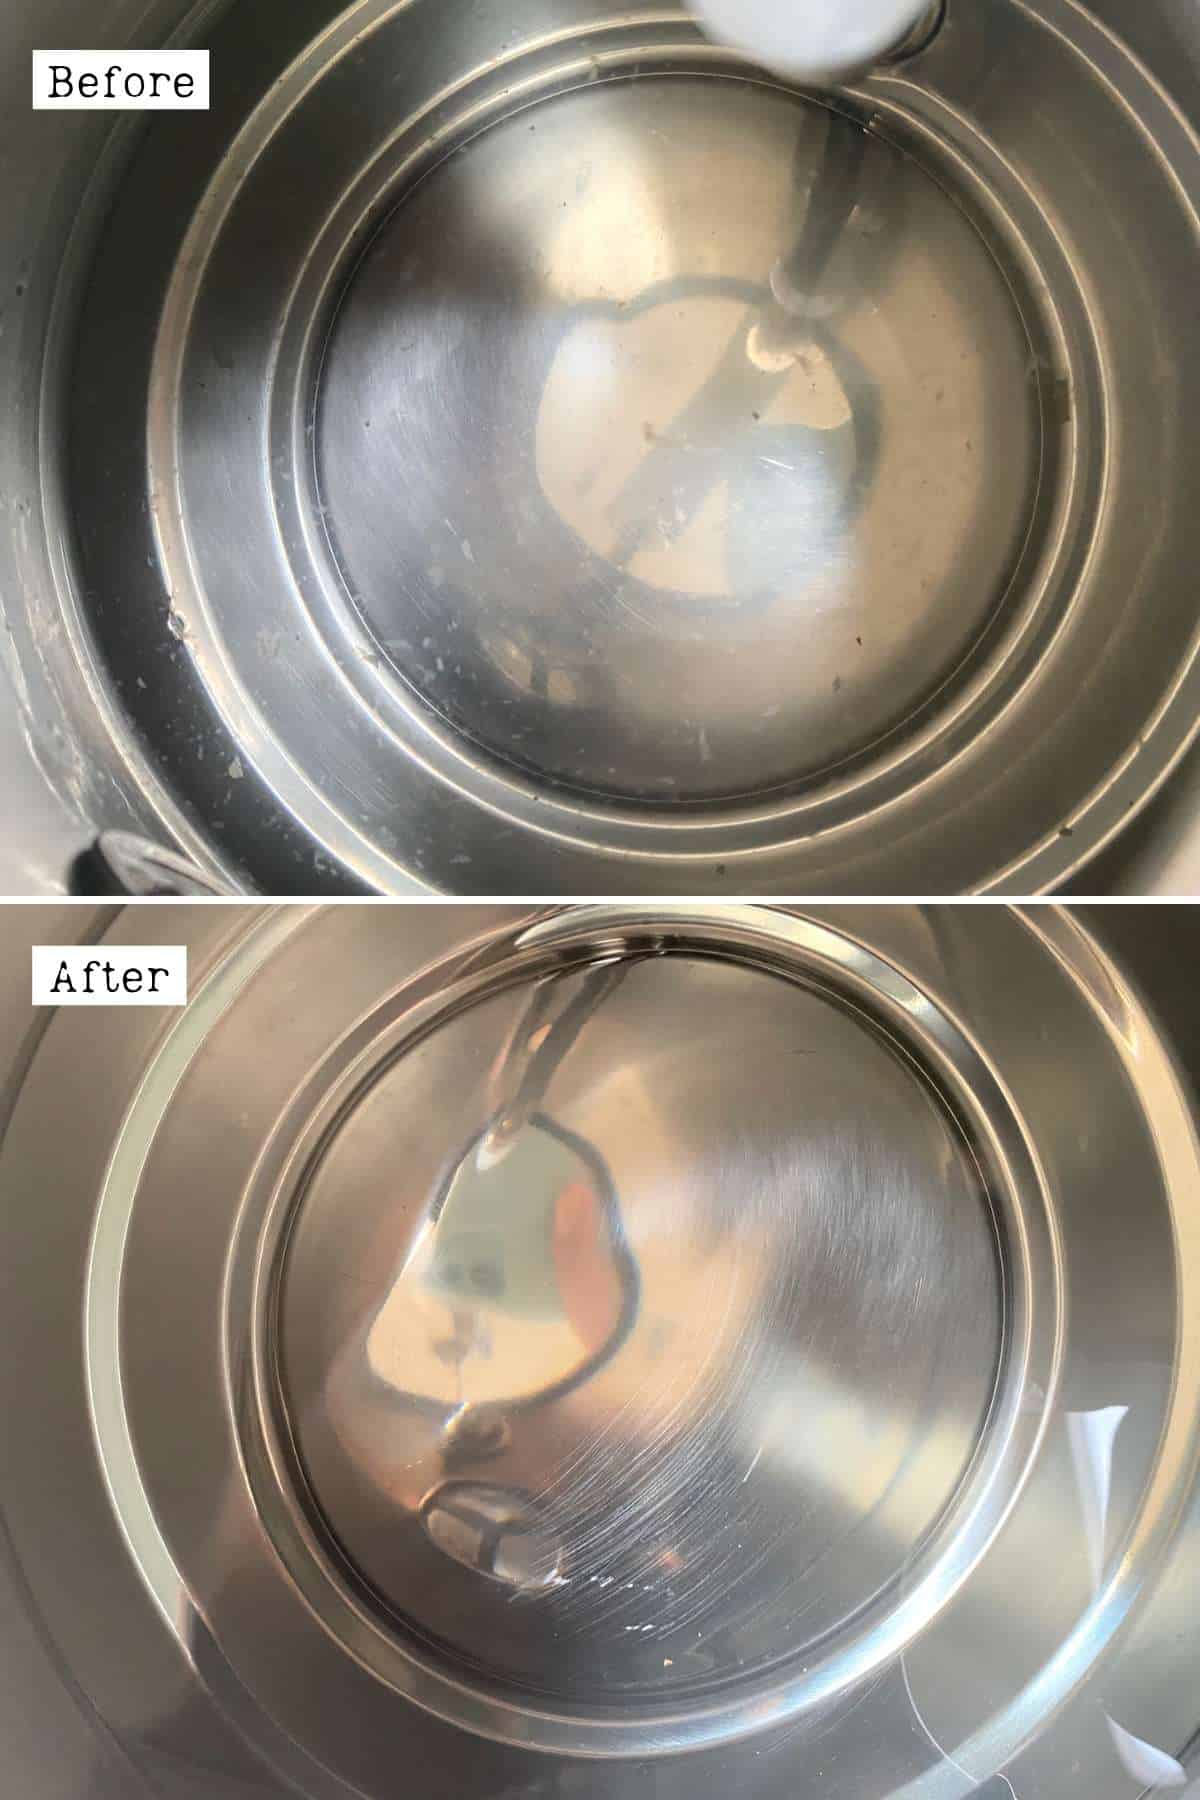 Before and after cleaning a kettle